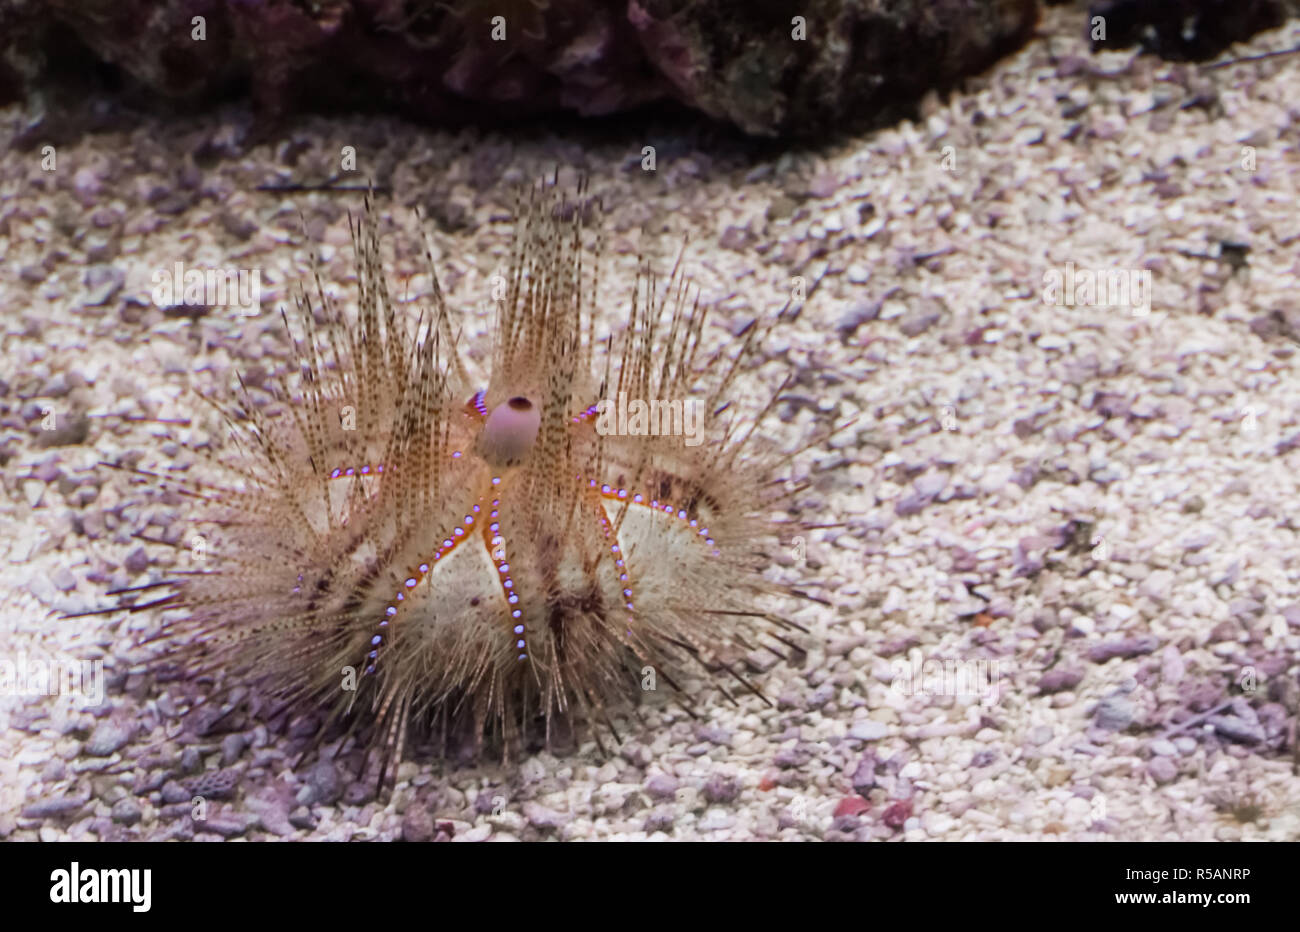 Juvenile red radiant sea urchin laying on the bottom and looking around, a tropical animal with spines from the pacific ocean Stock Photo